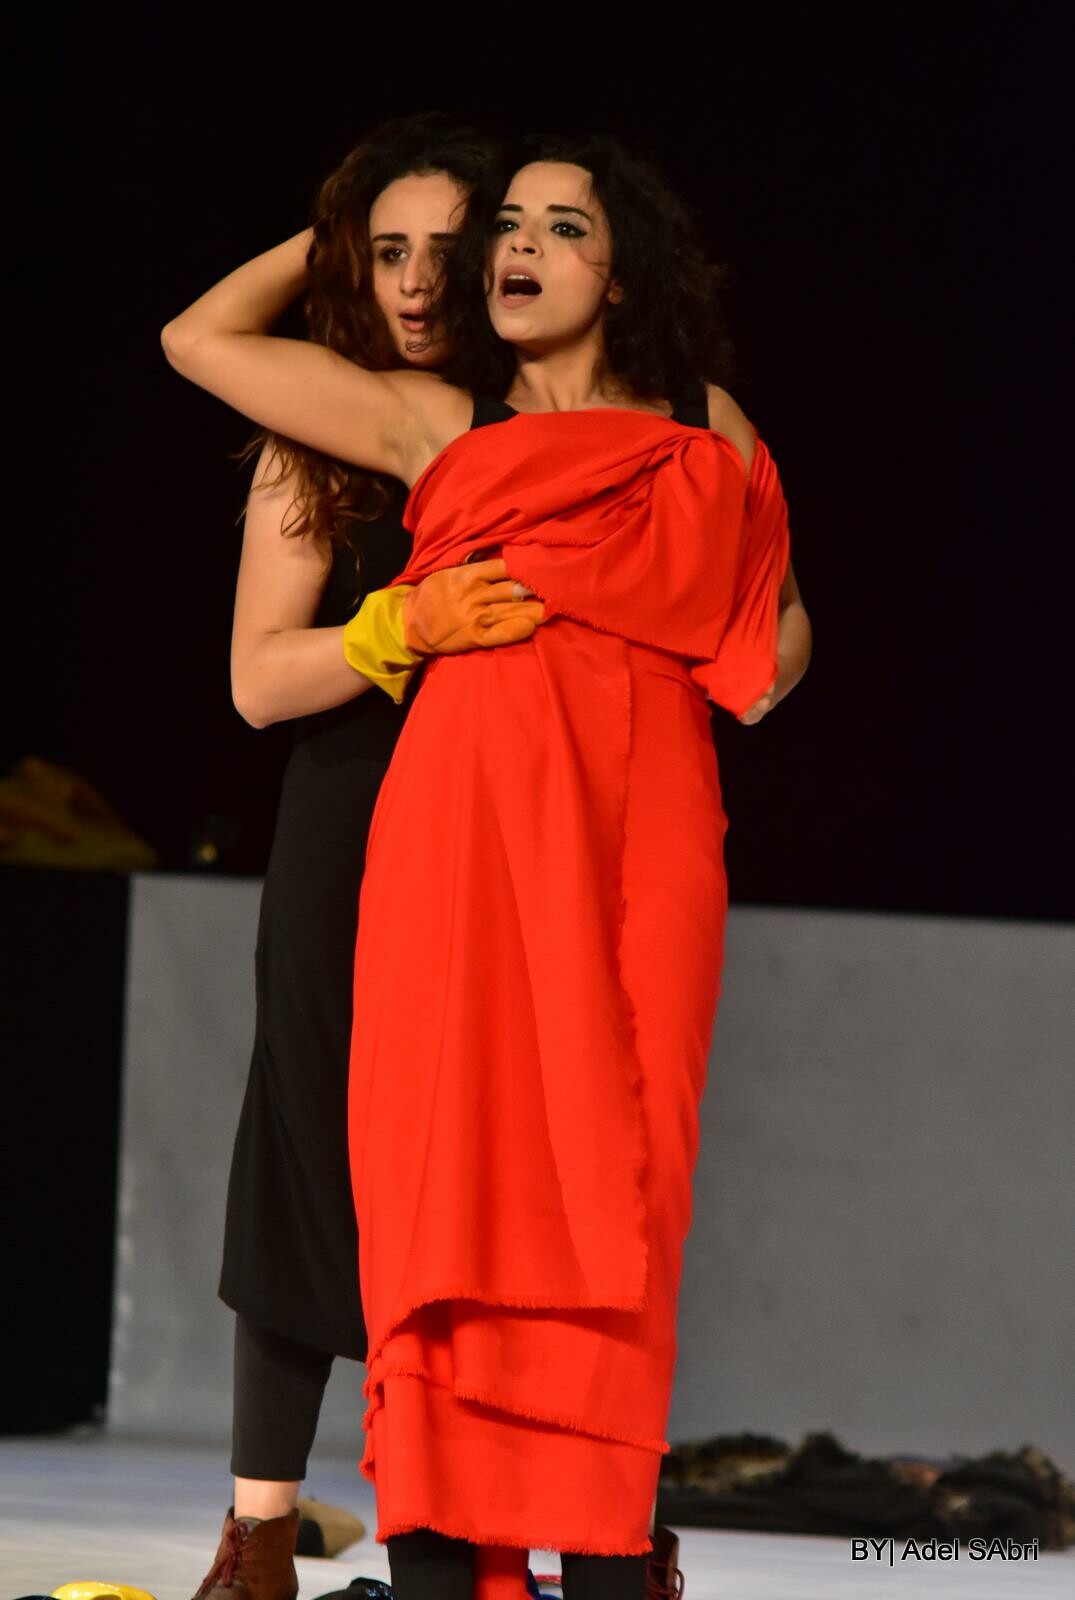 two female performers embracing